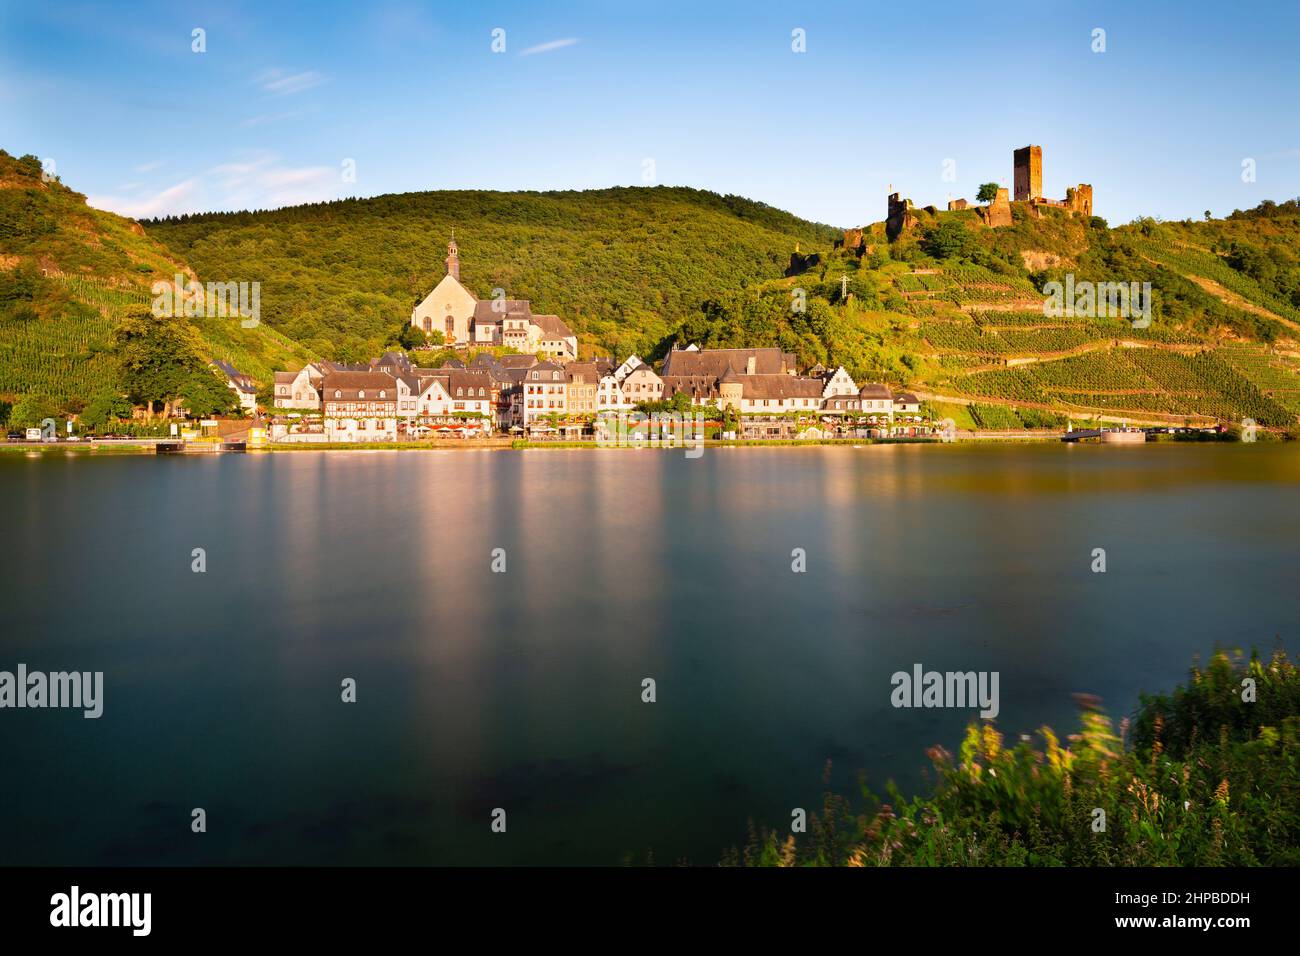 Long exposure summer evening view of the village Beilstein with the castle ruin Metternich in the Moselle Valley, Germany. Stock Photo